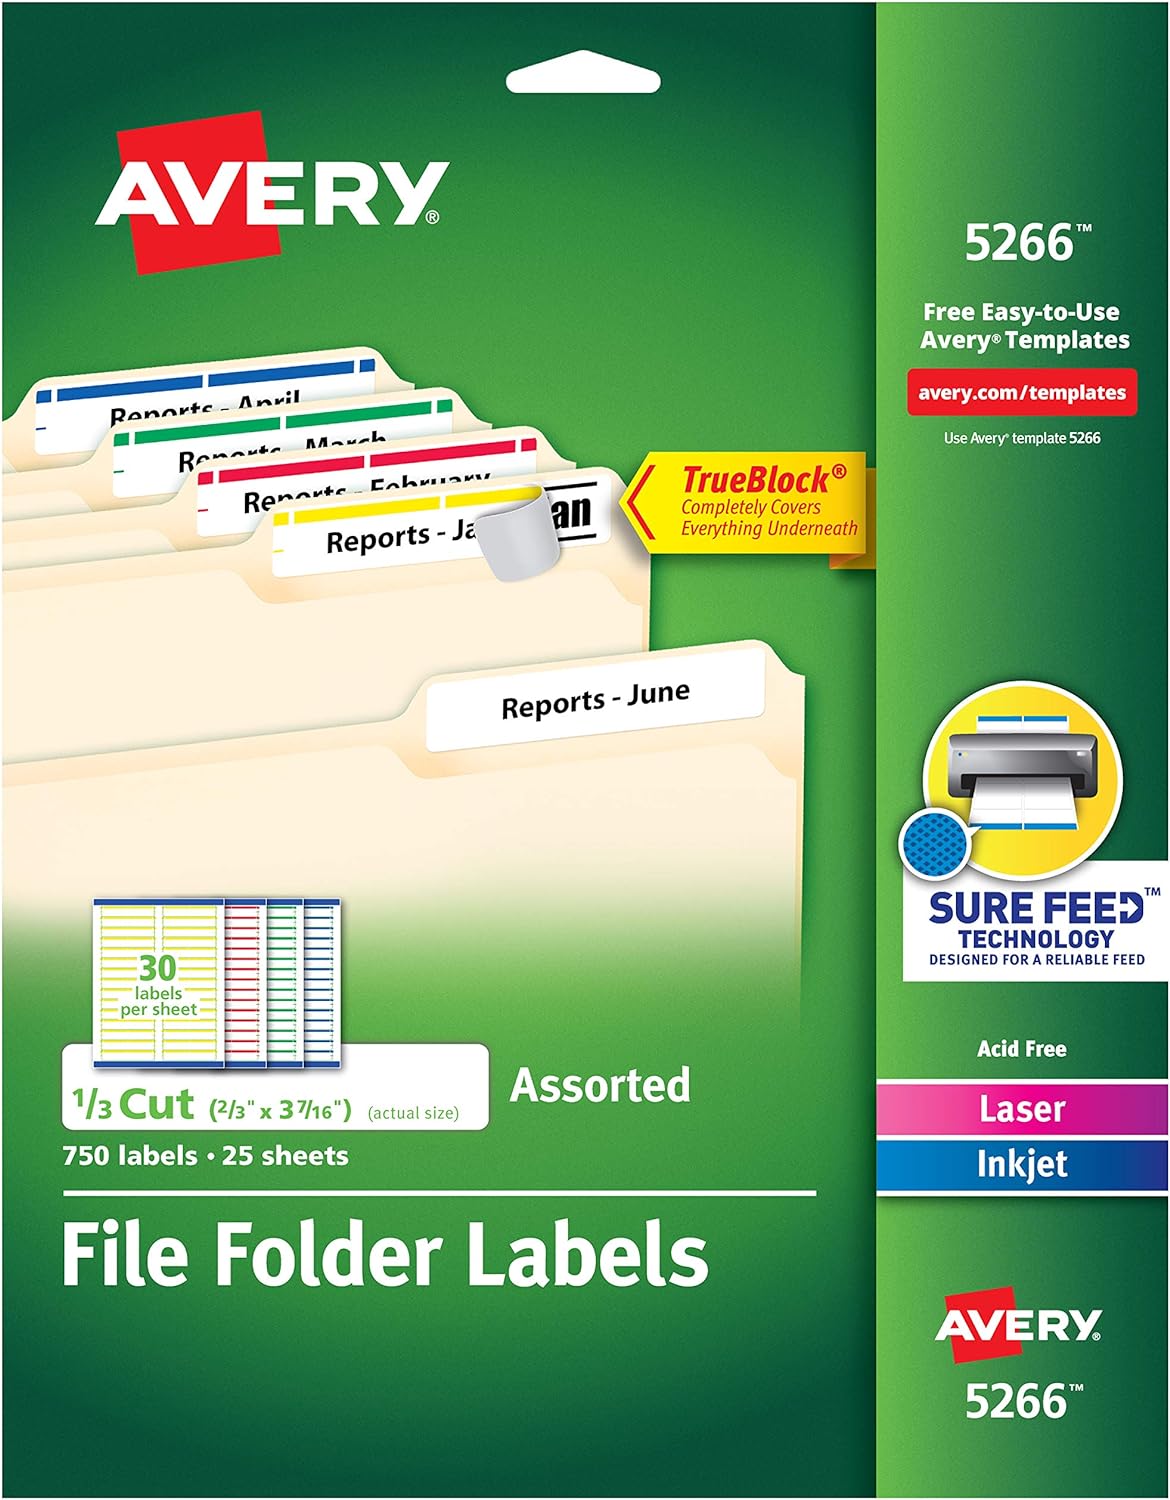 File folders with labels